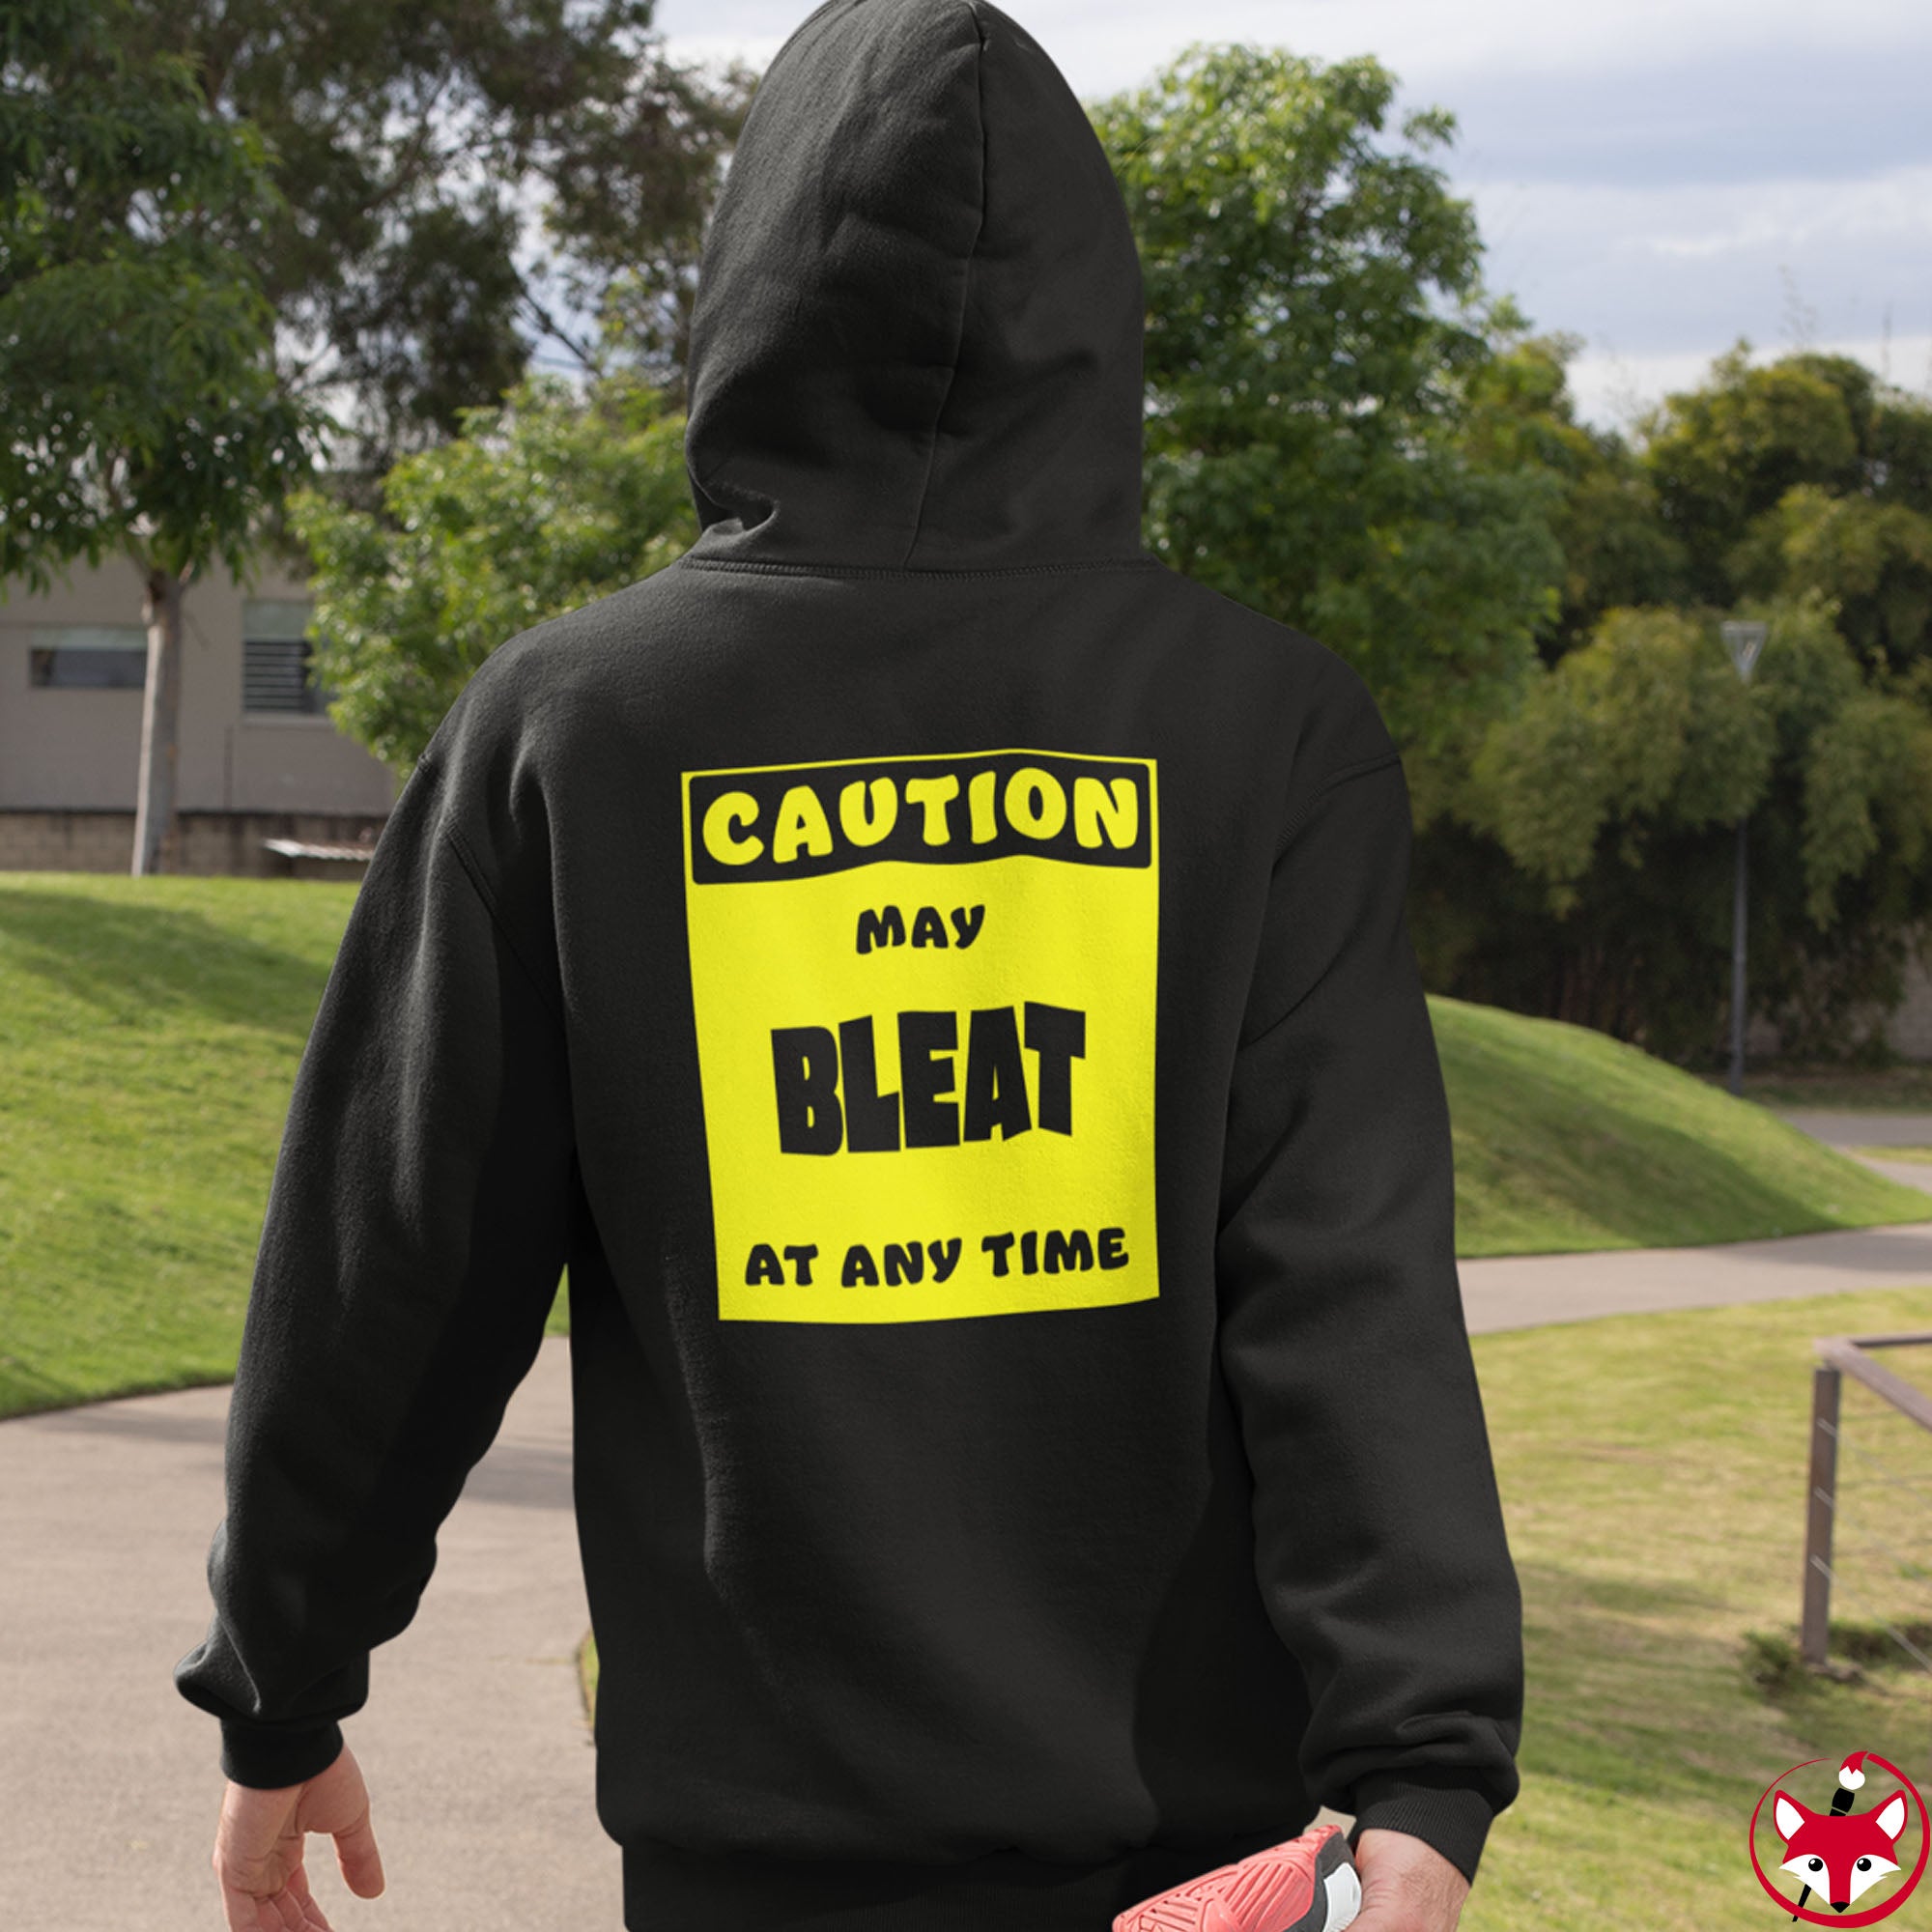 CAUTION! May BLEAT at any time! - Hoodie Hoodie AFLT-Whootorca 